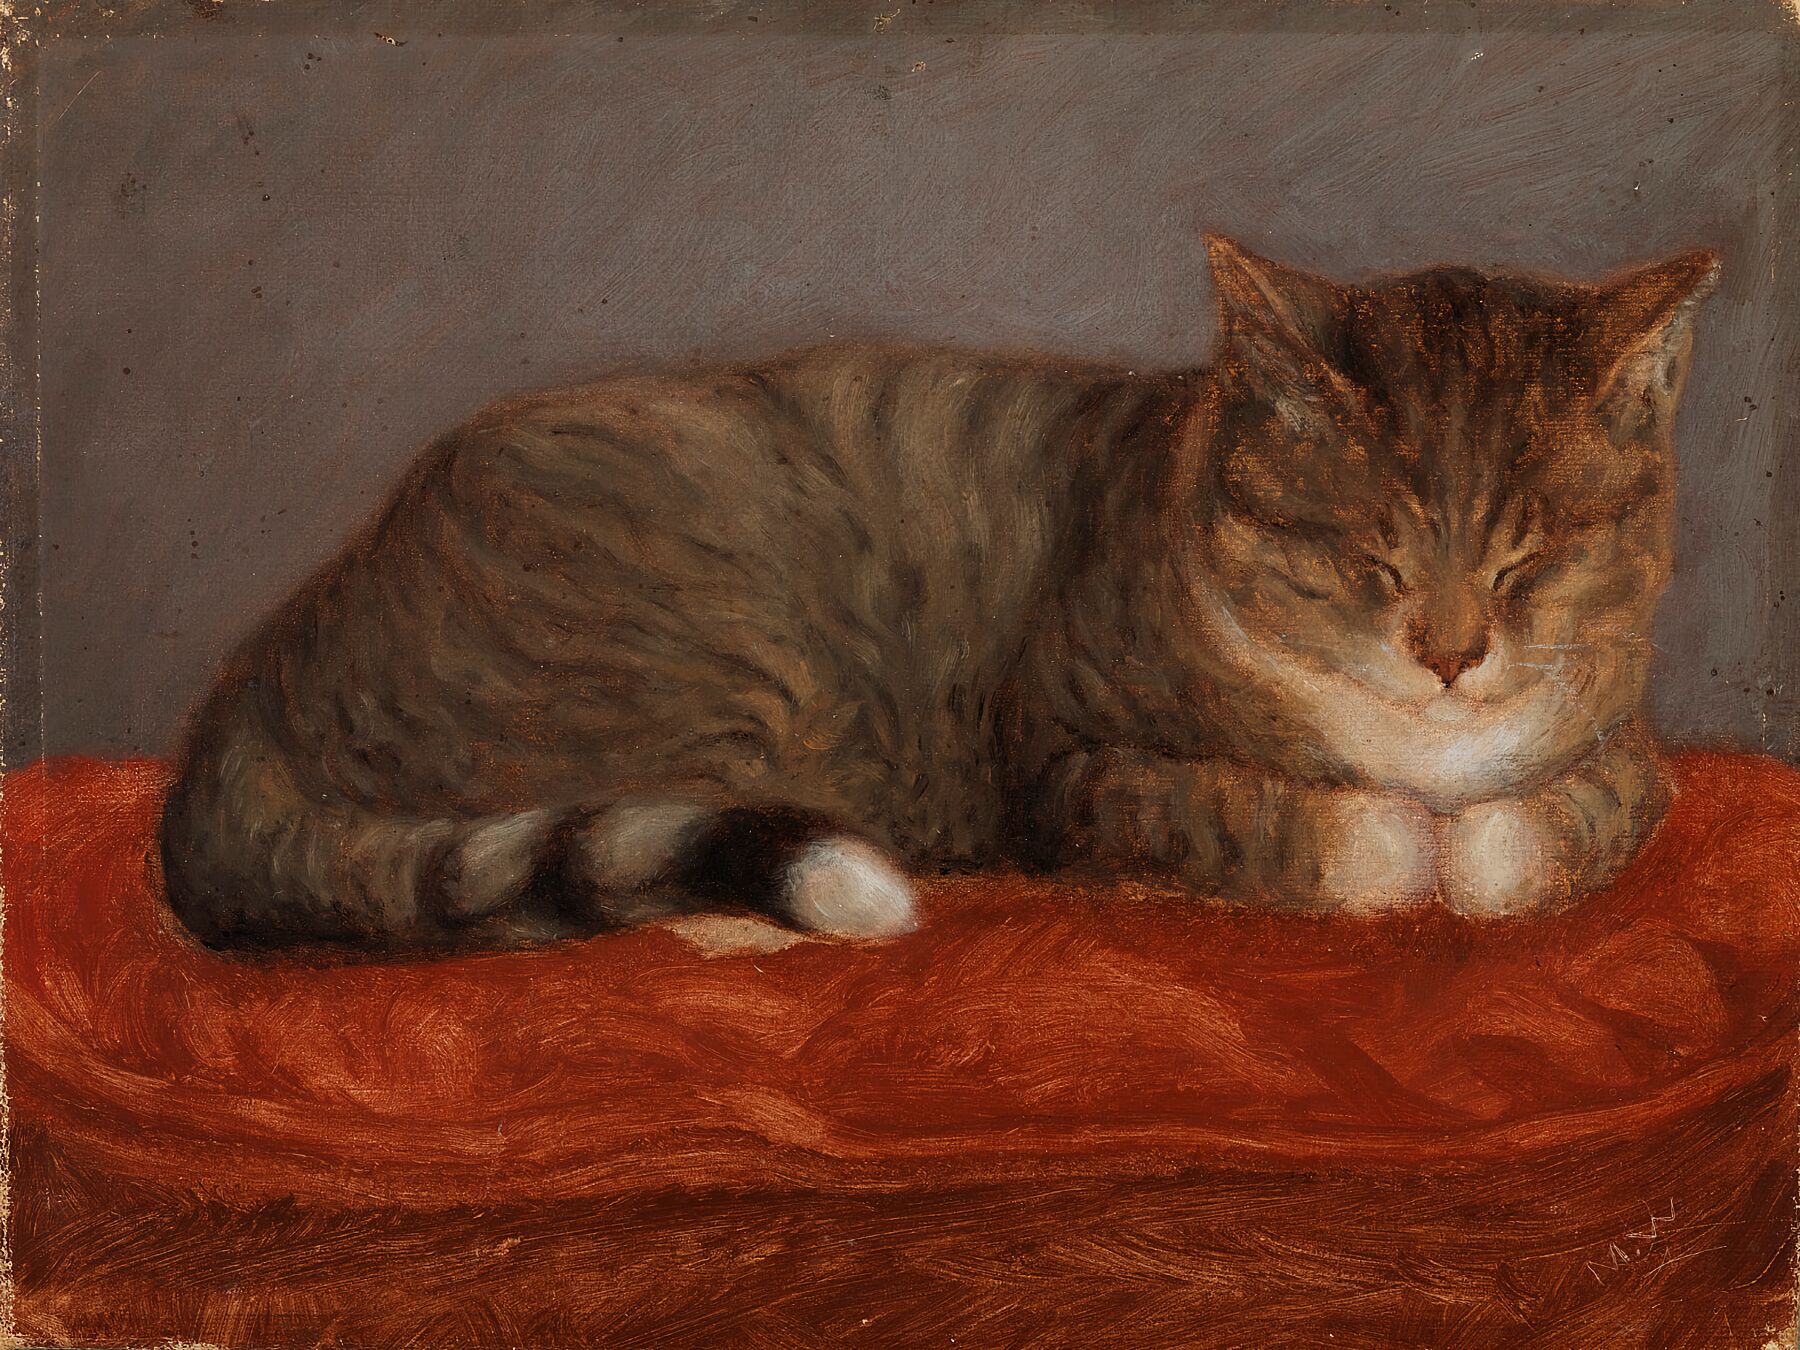 The Recumbent Cat by Maria Wiik - 1872-1873